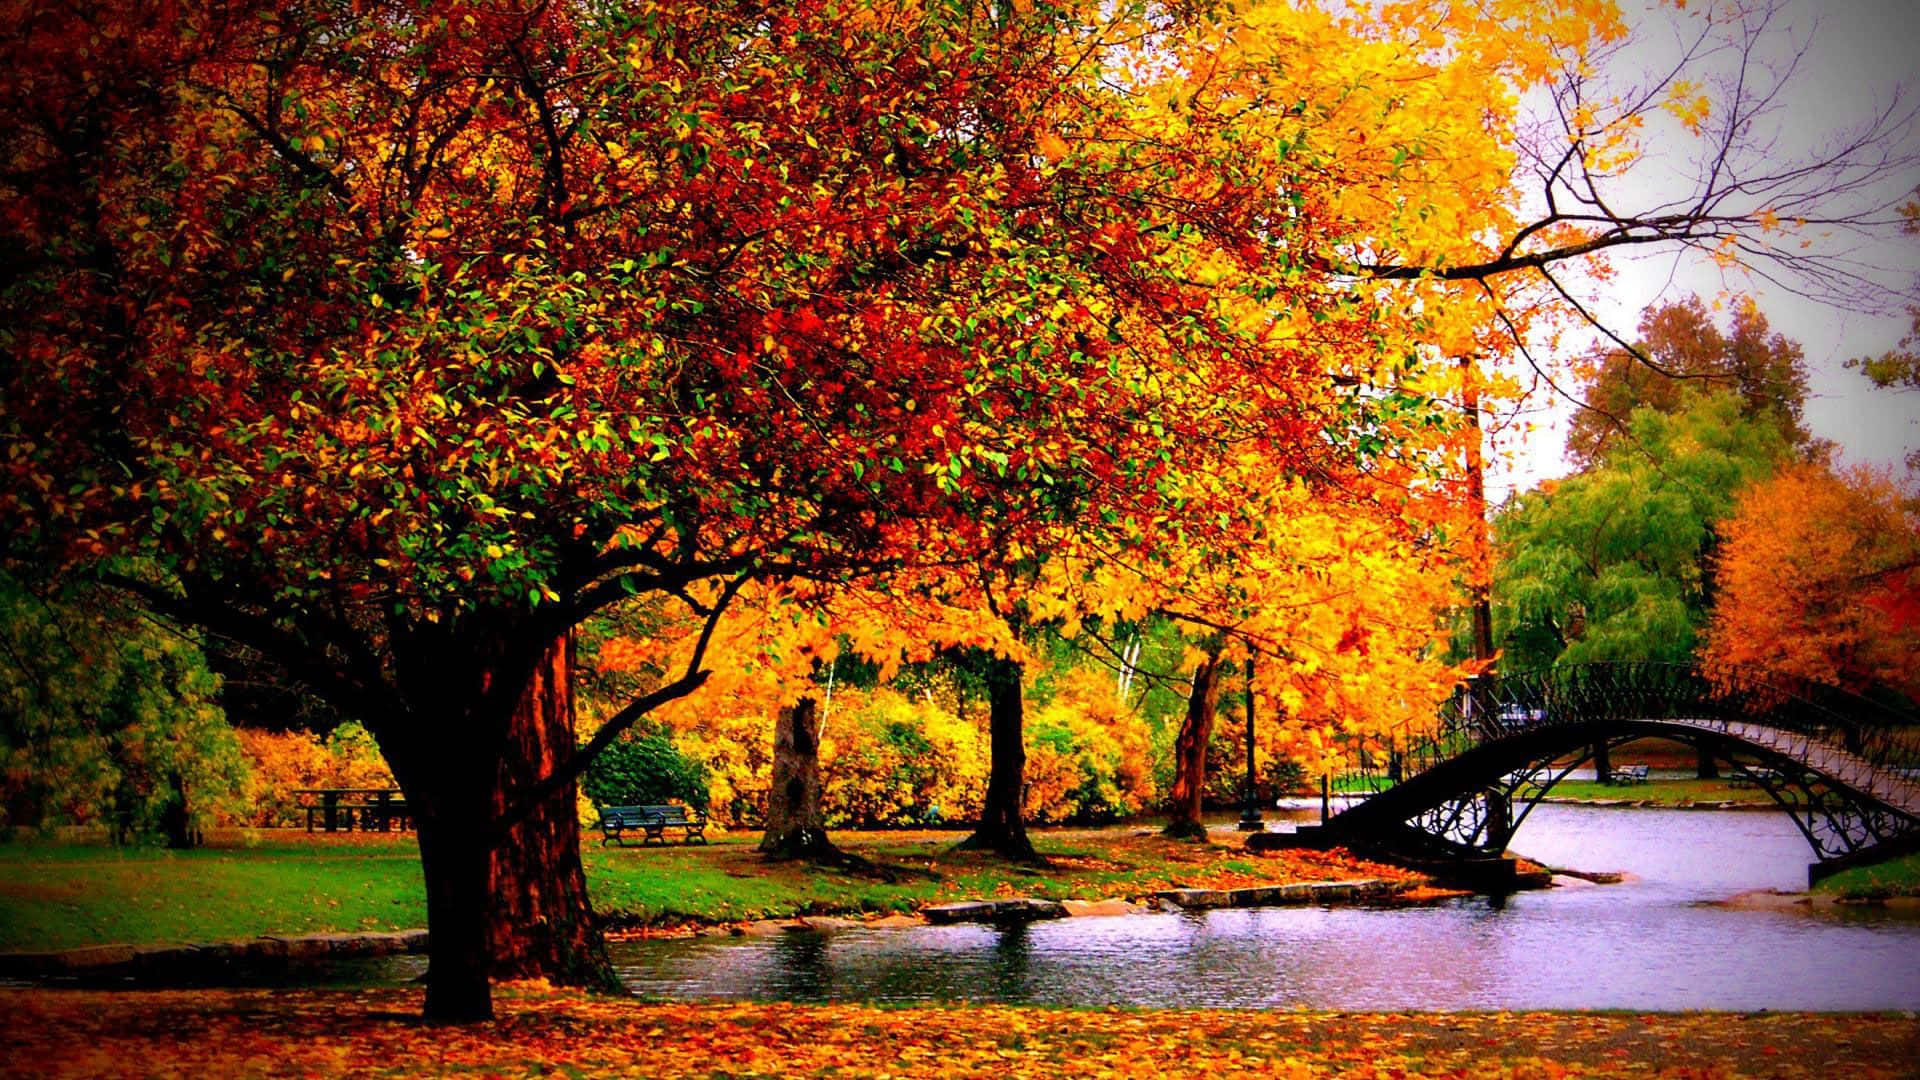 Enjoy the scenic view of a colorful autumn